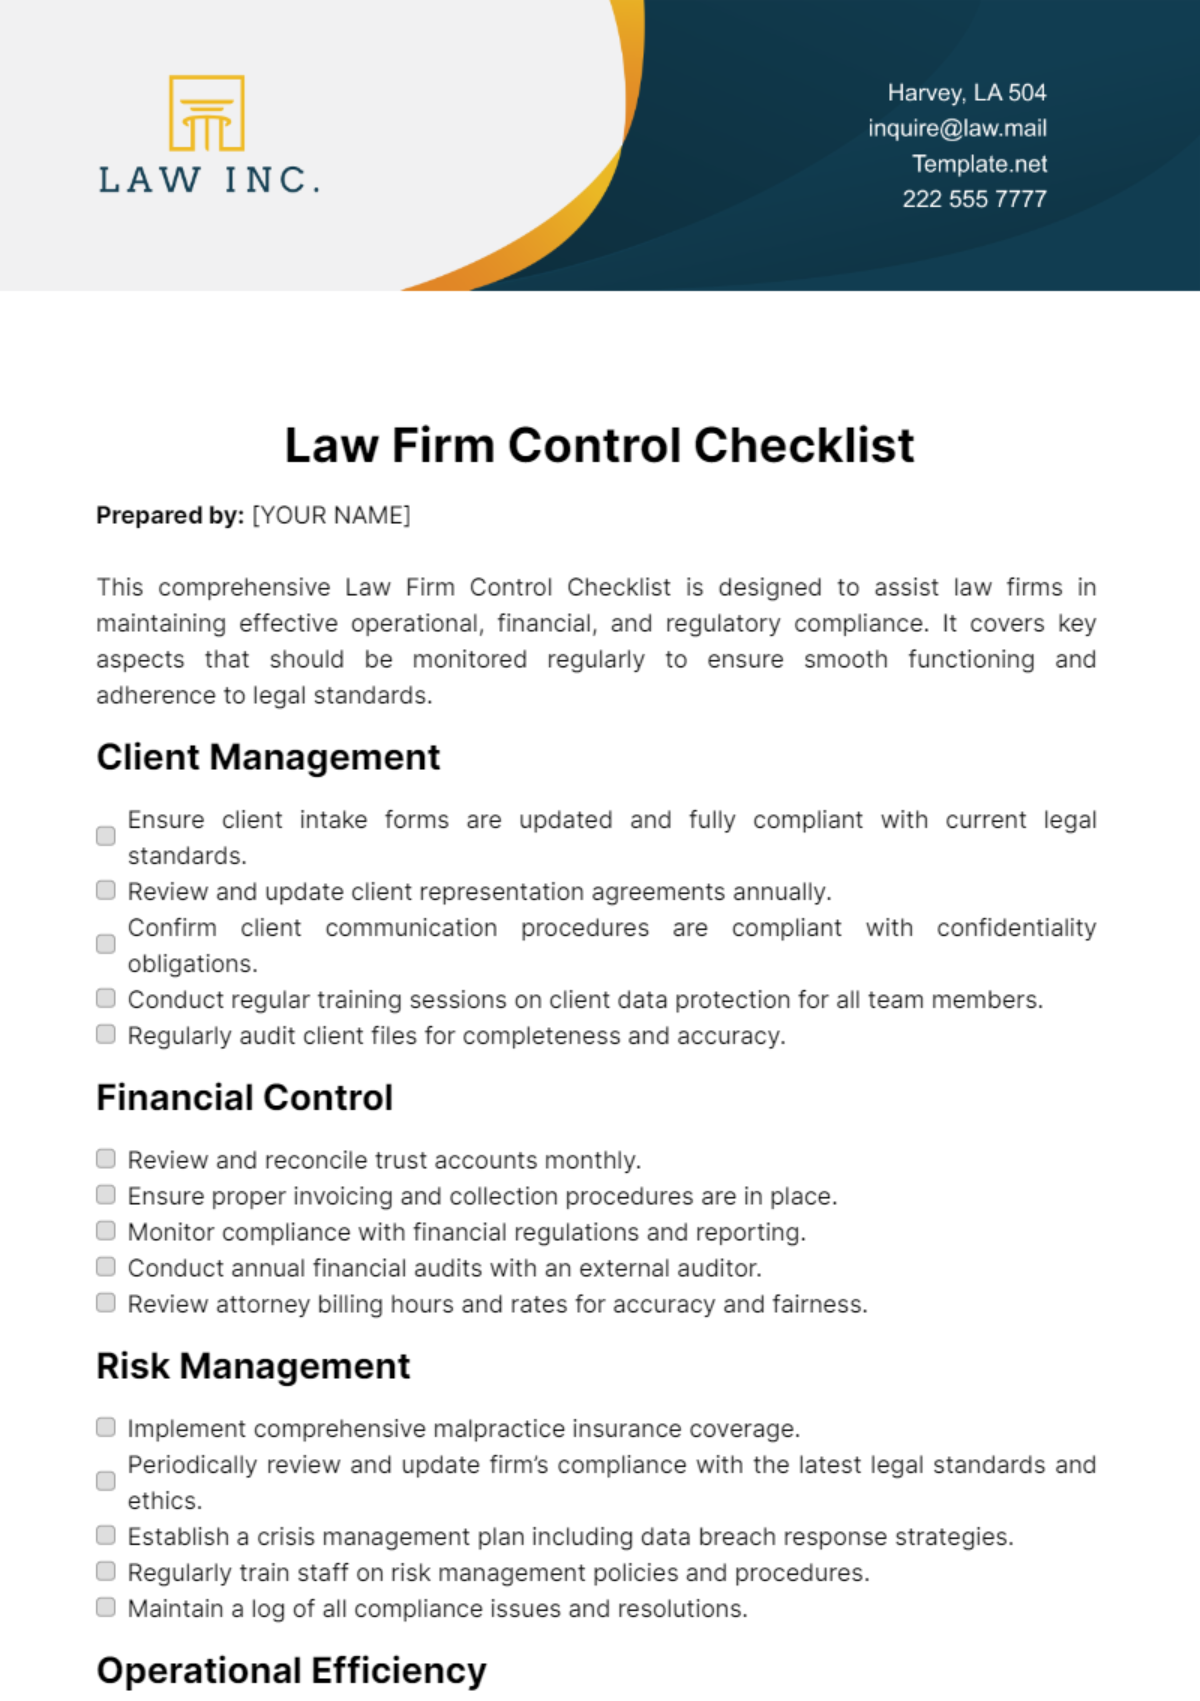 Law Firm Control Checklist Template